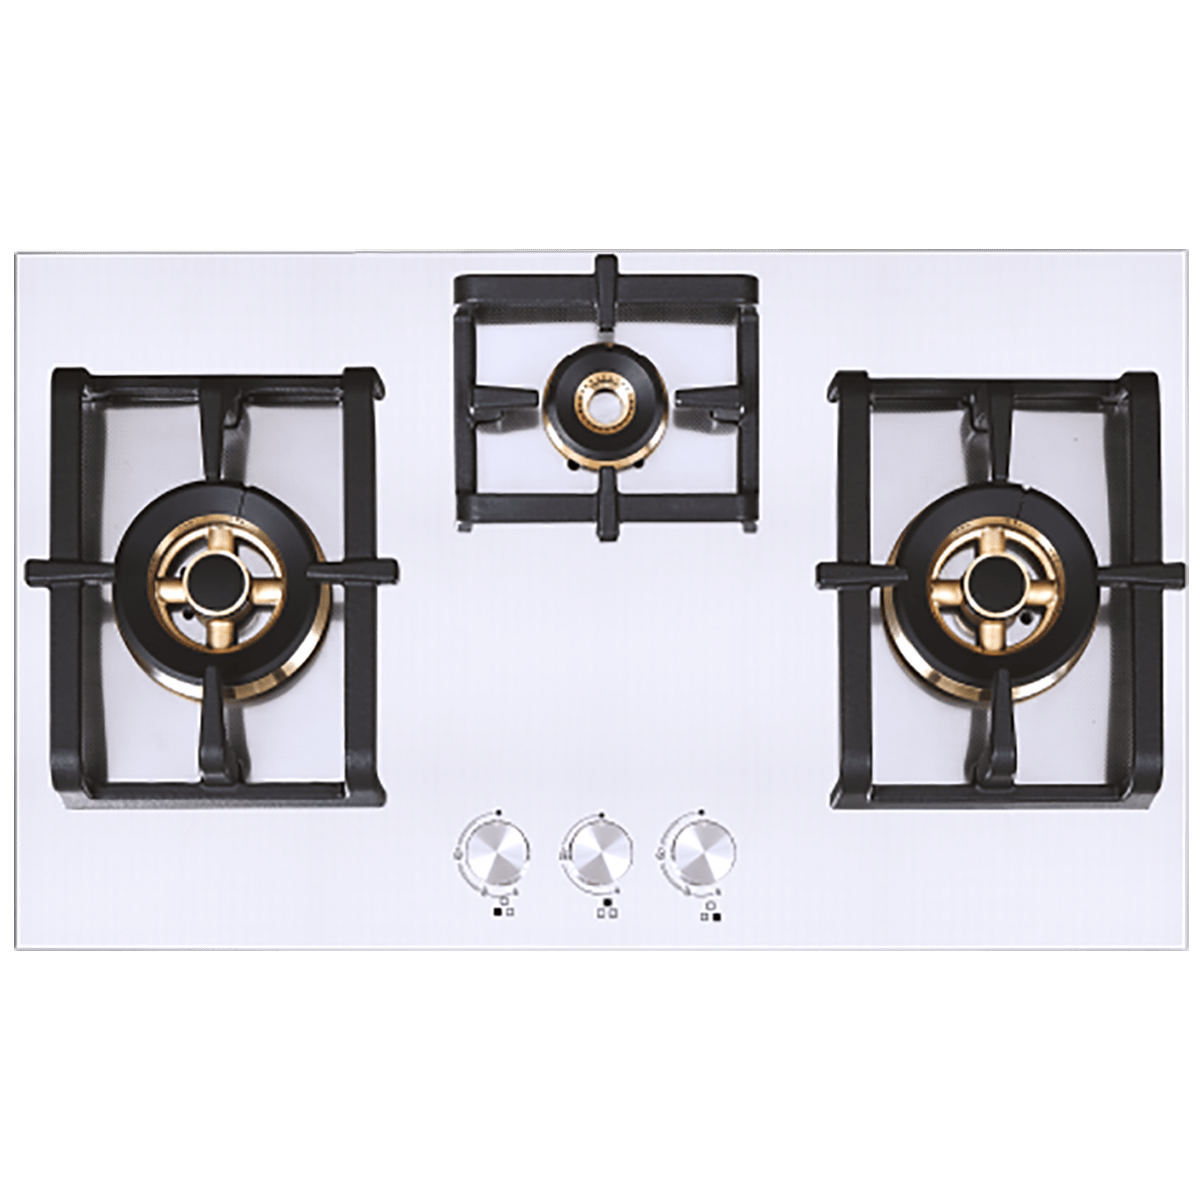 Elica Inox Pro FB MFC 3B 75 DX FFD 3 Burner Stainless Steel Built-in Gas Hob (Automatic Ignition, 3020, Steel)_1